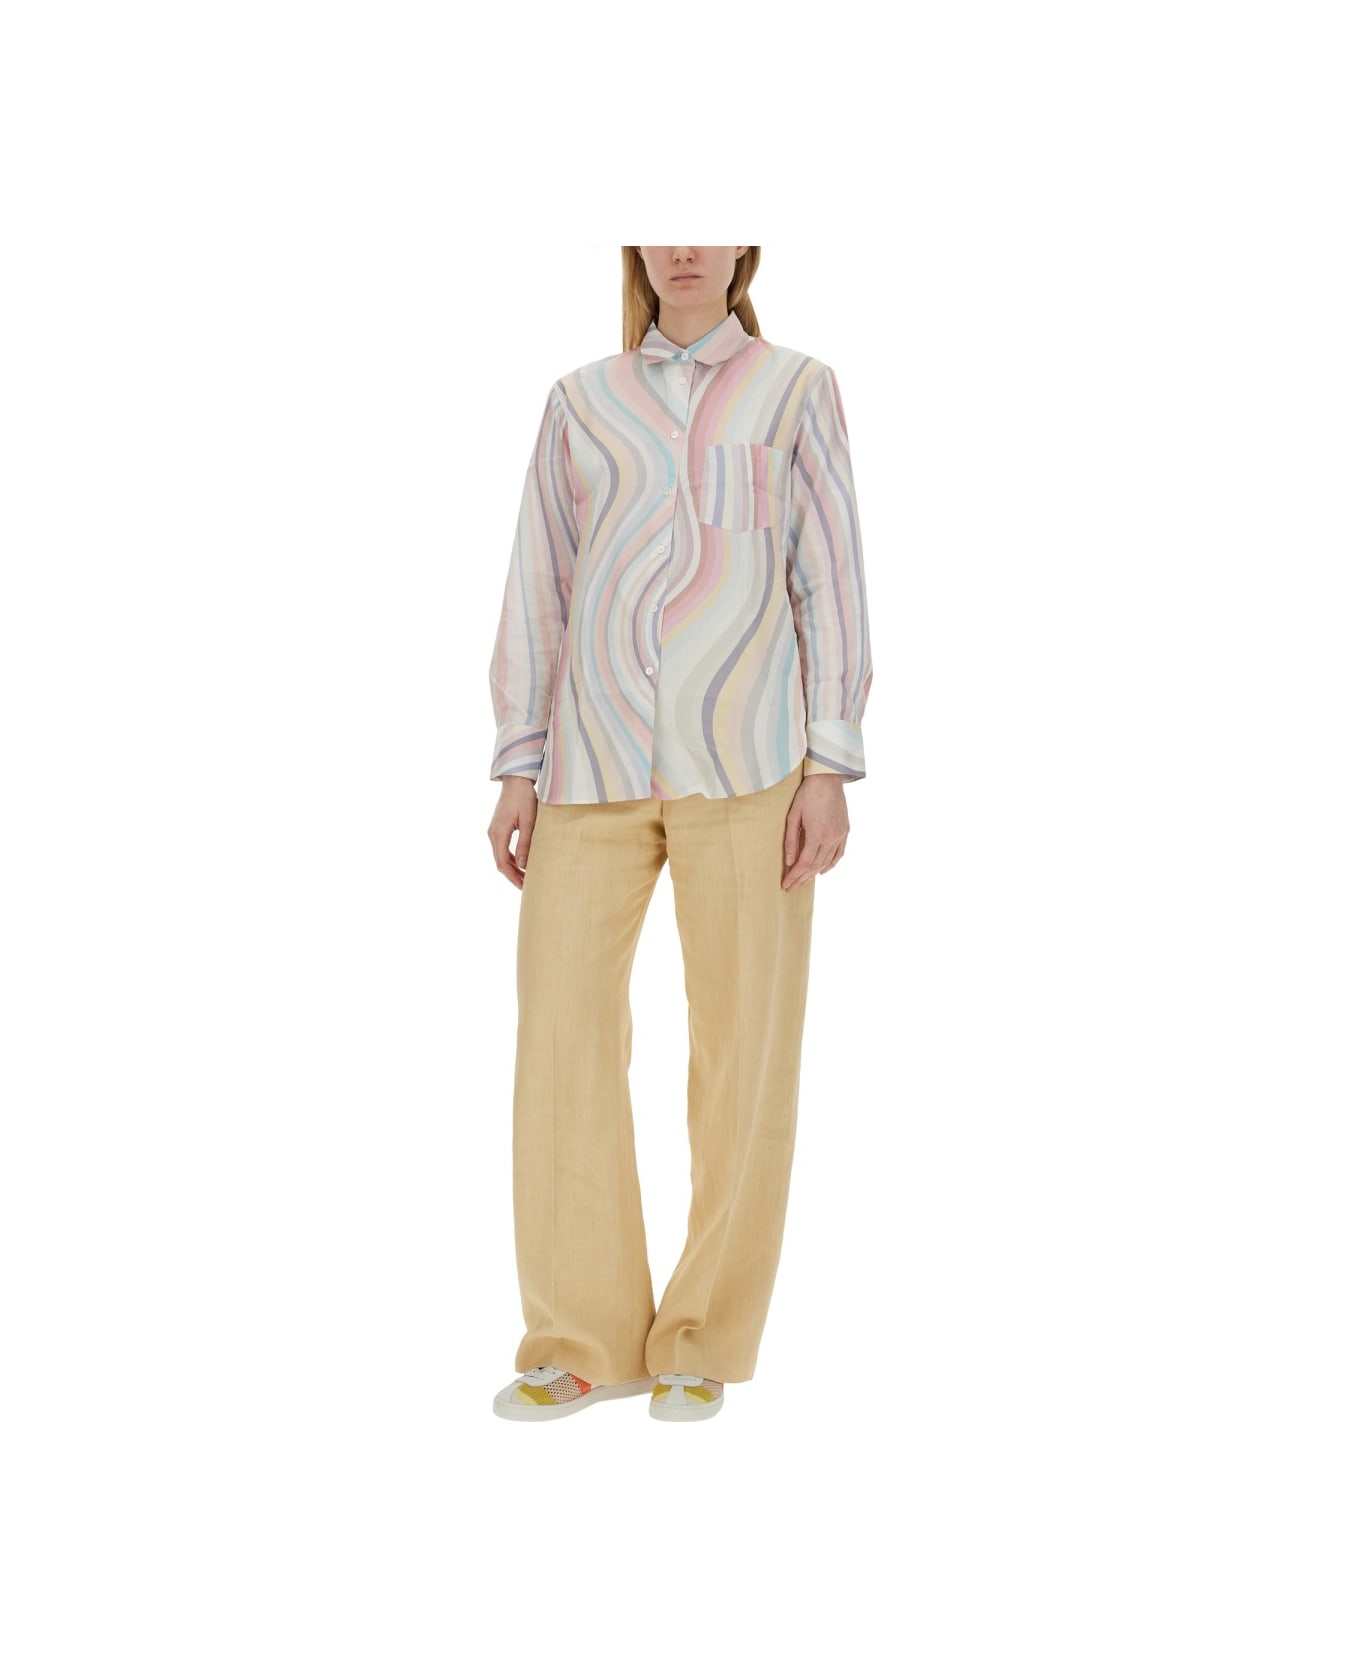 PS by Paul Smith 'faded Swirl' Shirt - MULTICOLOUR